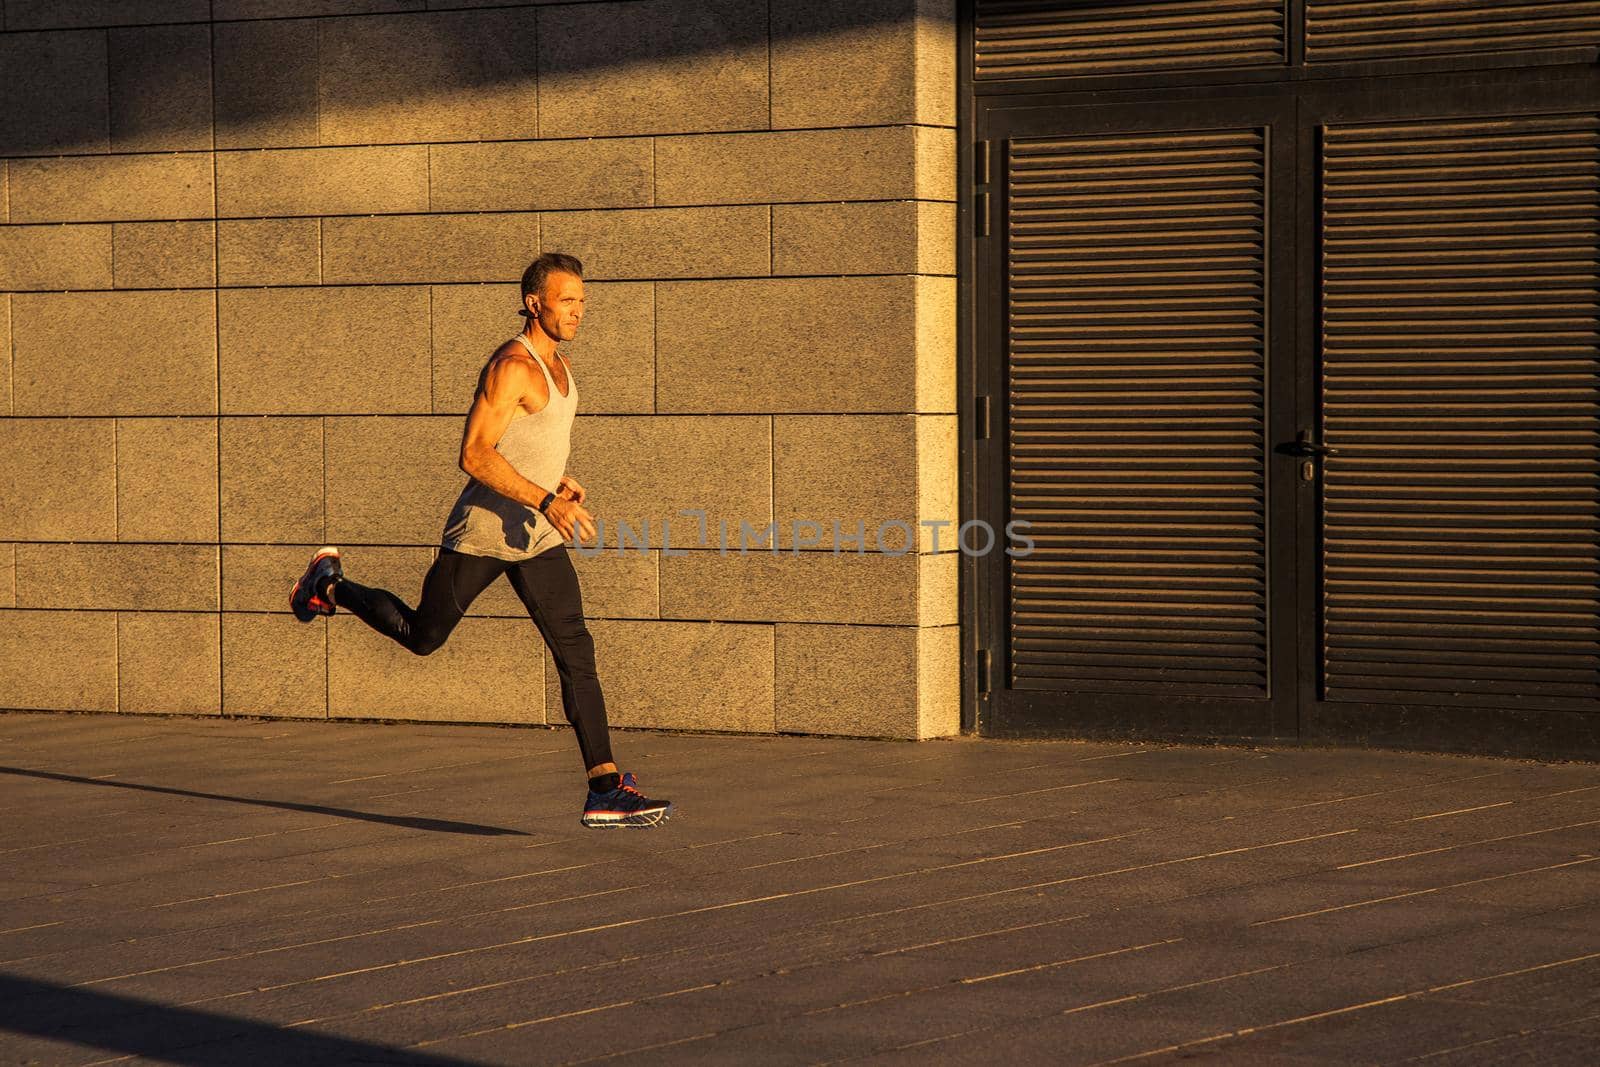 Aged sportsman running on country road by Khosro1